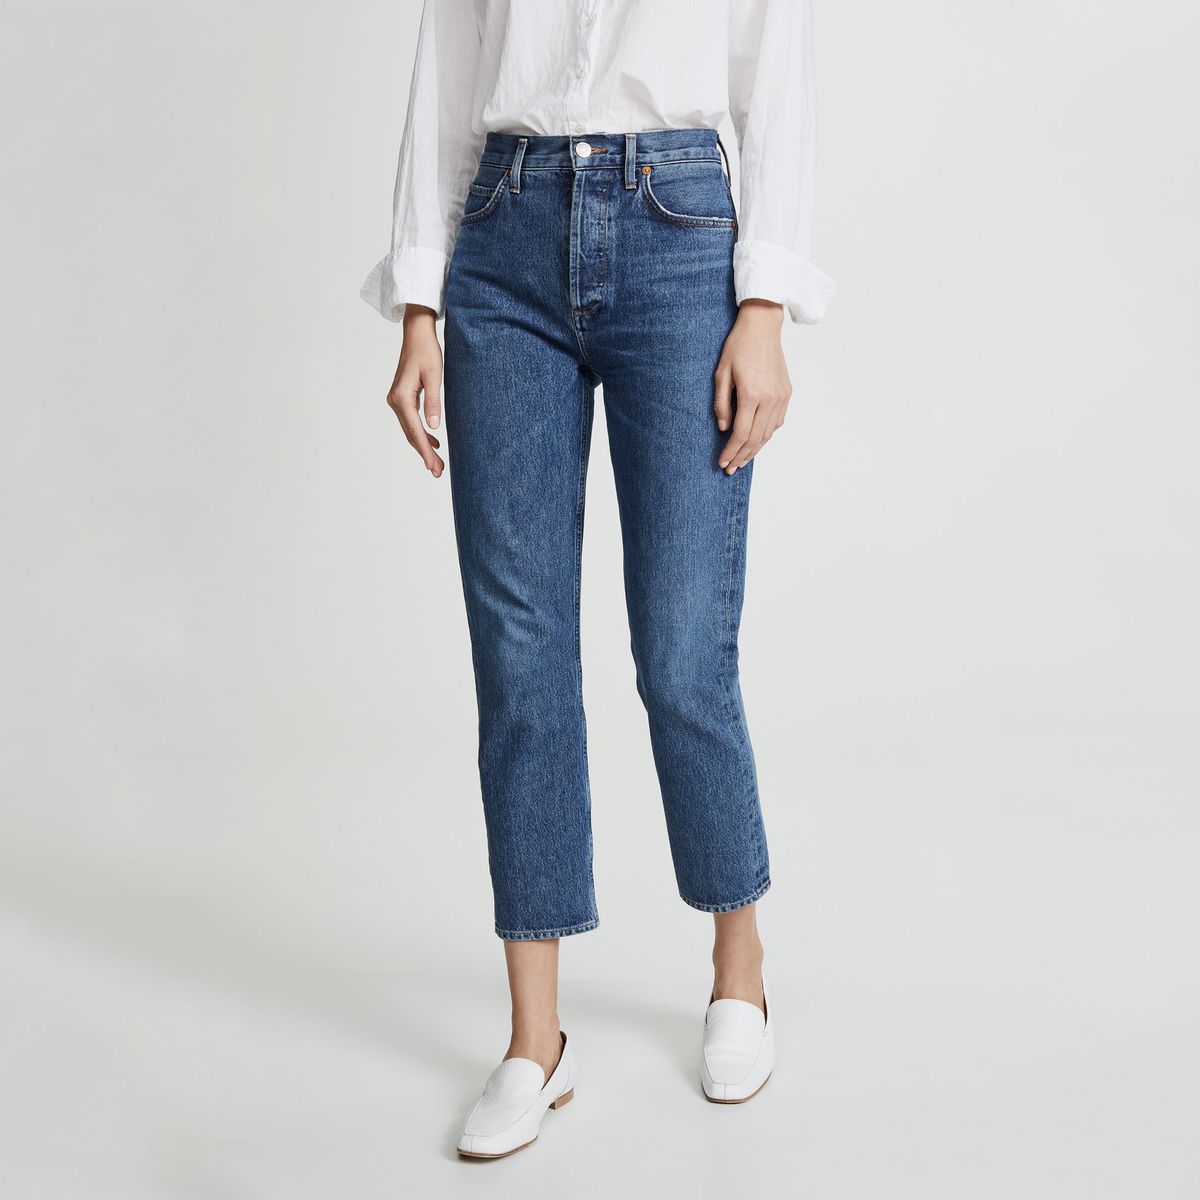 Best High-Waisted Jeans for Women | The